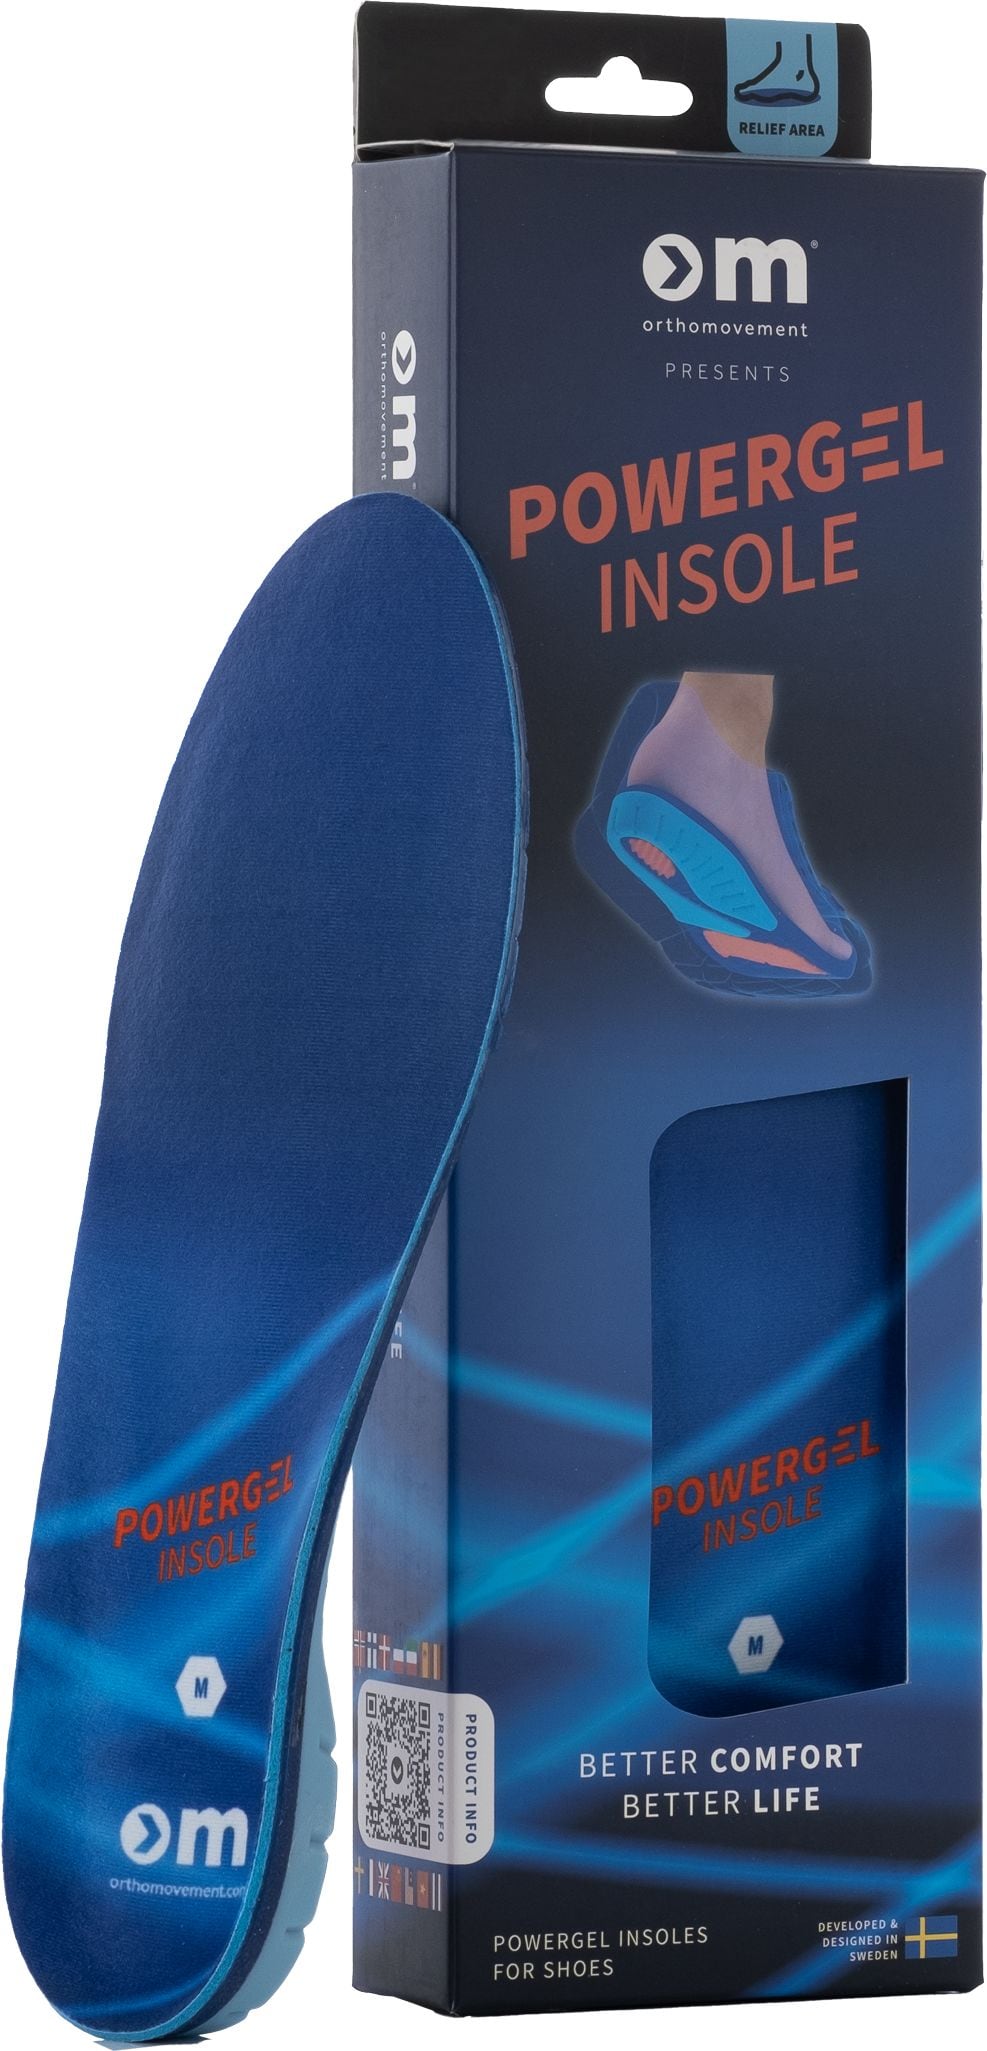 ORTHO MOVEMENT, GEL INSOLE